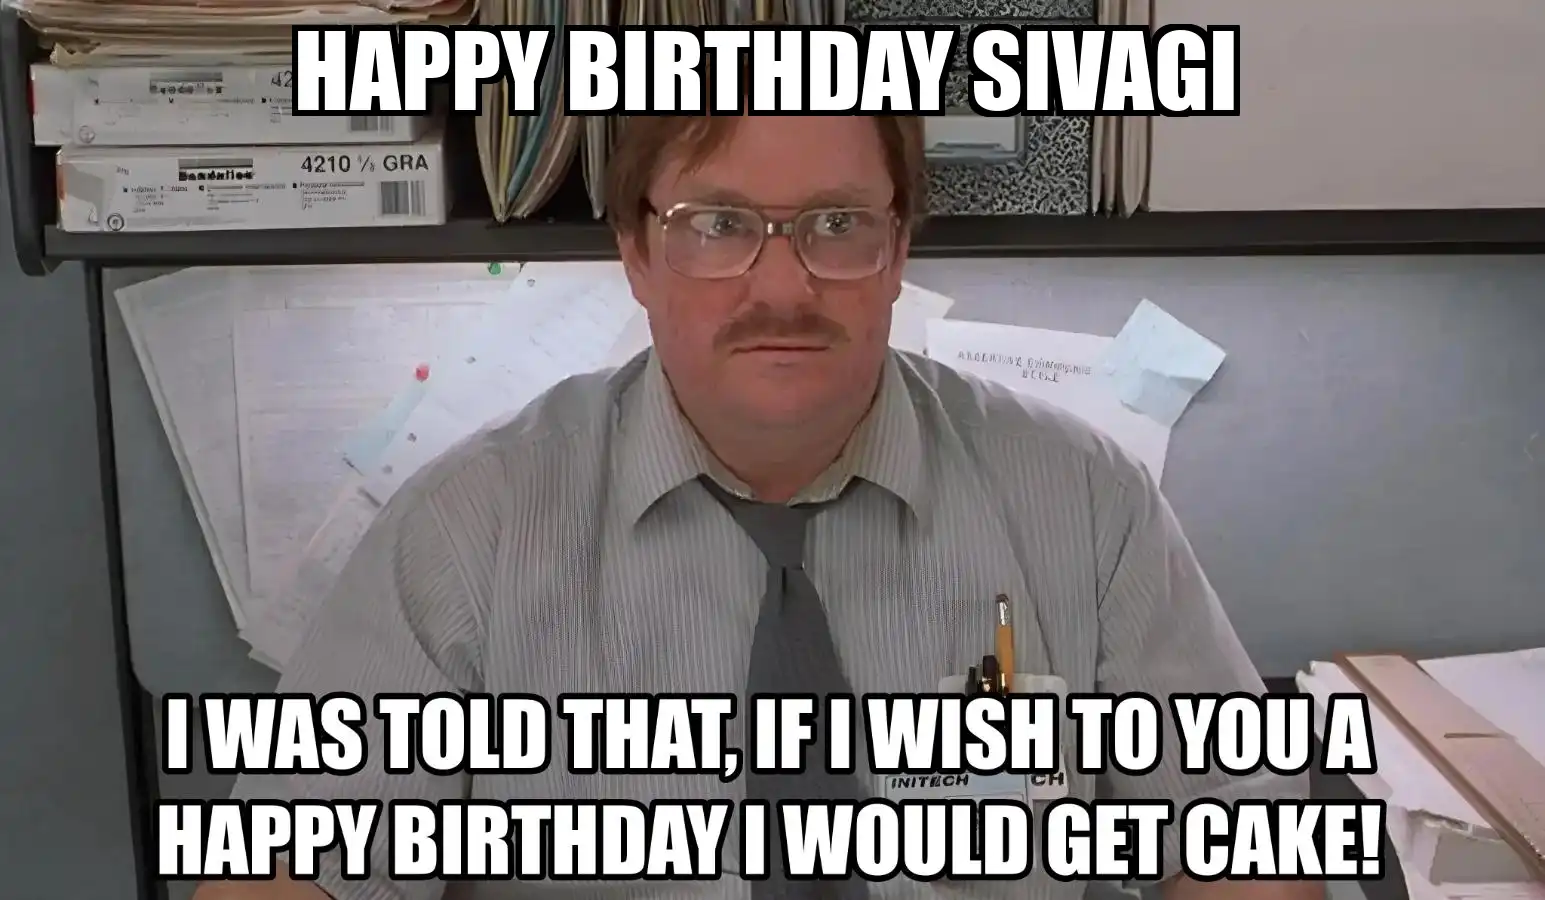 Happy Birthday Sivagi I Would Get A Cake Meme